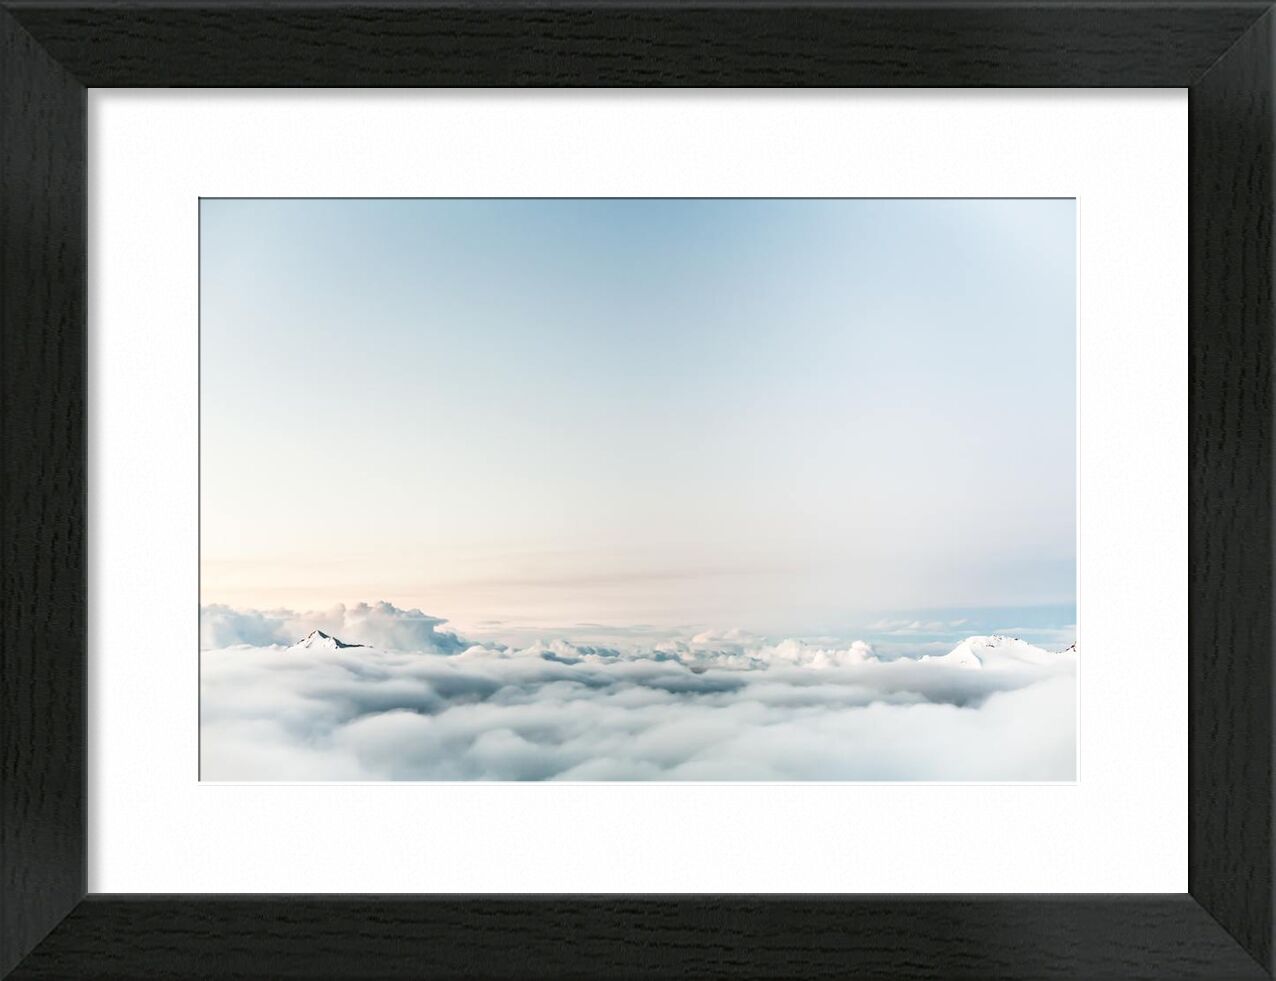 Over the clouds from Pierre Gaultier, Prodi Art, above, atmosphere, clouds, flight, flying, freedom, high, horizon, mountains, peak, sky, summit